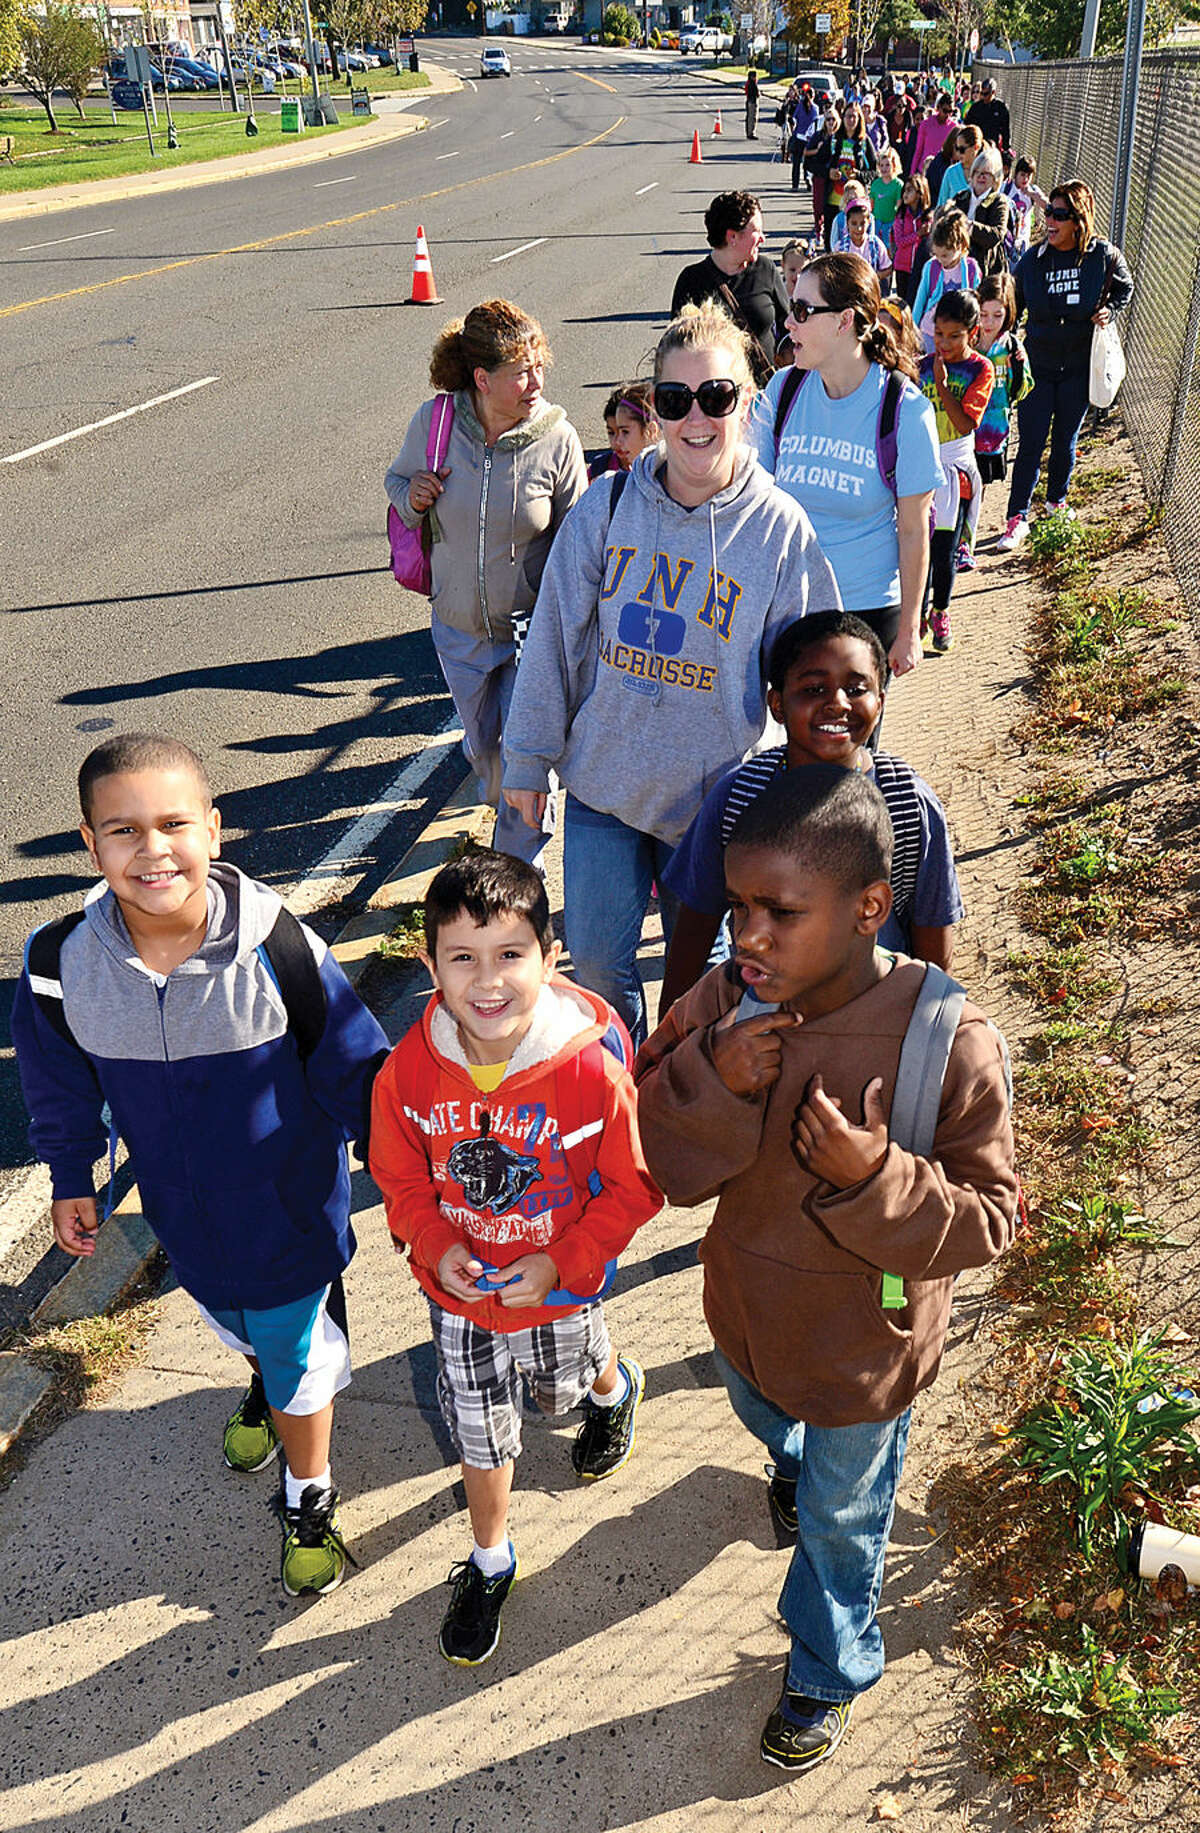 Hour photo / Erik Trautmann As part of its new Healthy Habits Initiative, Columbus Magnet School holds their first Walk to School Day with students, staff, parents, Norwalk Health Department staff and the Greater Norwalk Healthy Living Workgroup from Veteran's Memorial Park the the school Friday morning.